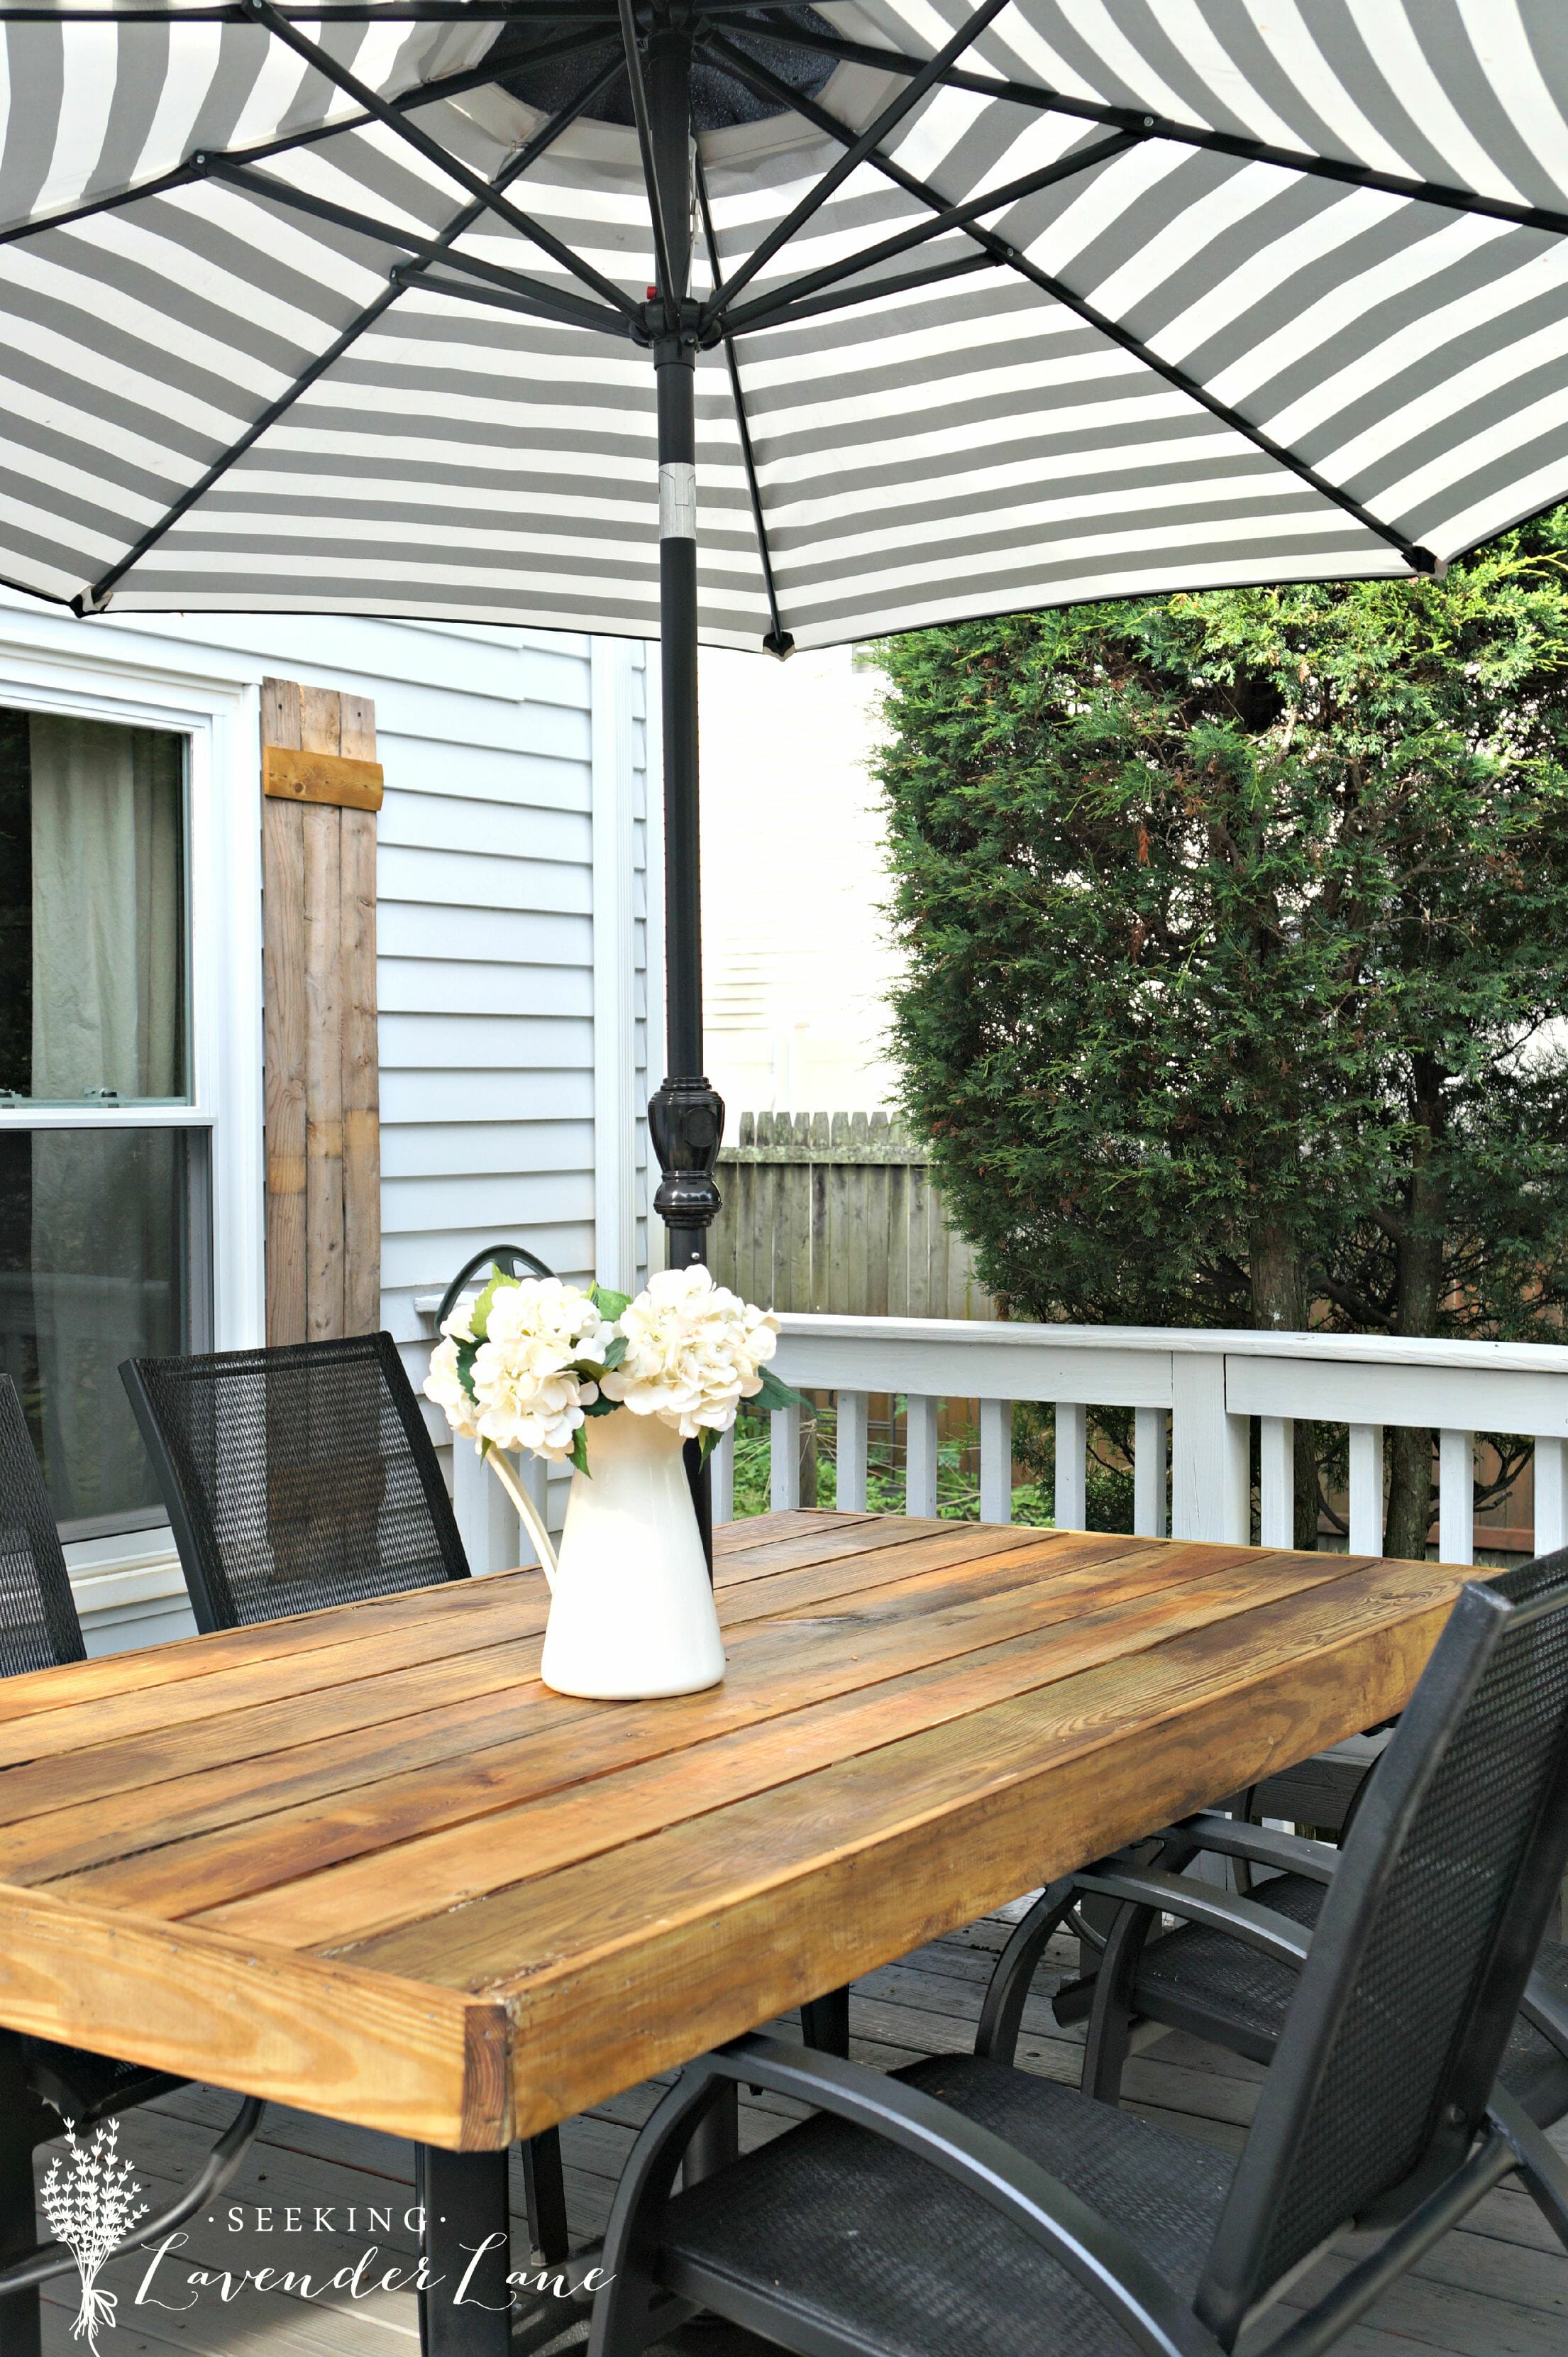 Cheap home decor how to update an outdated outdoor furniture